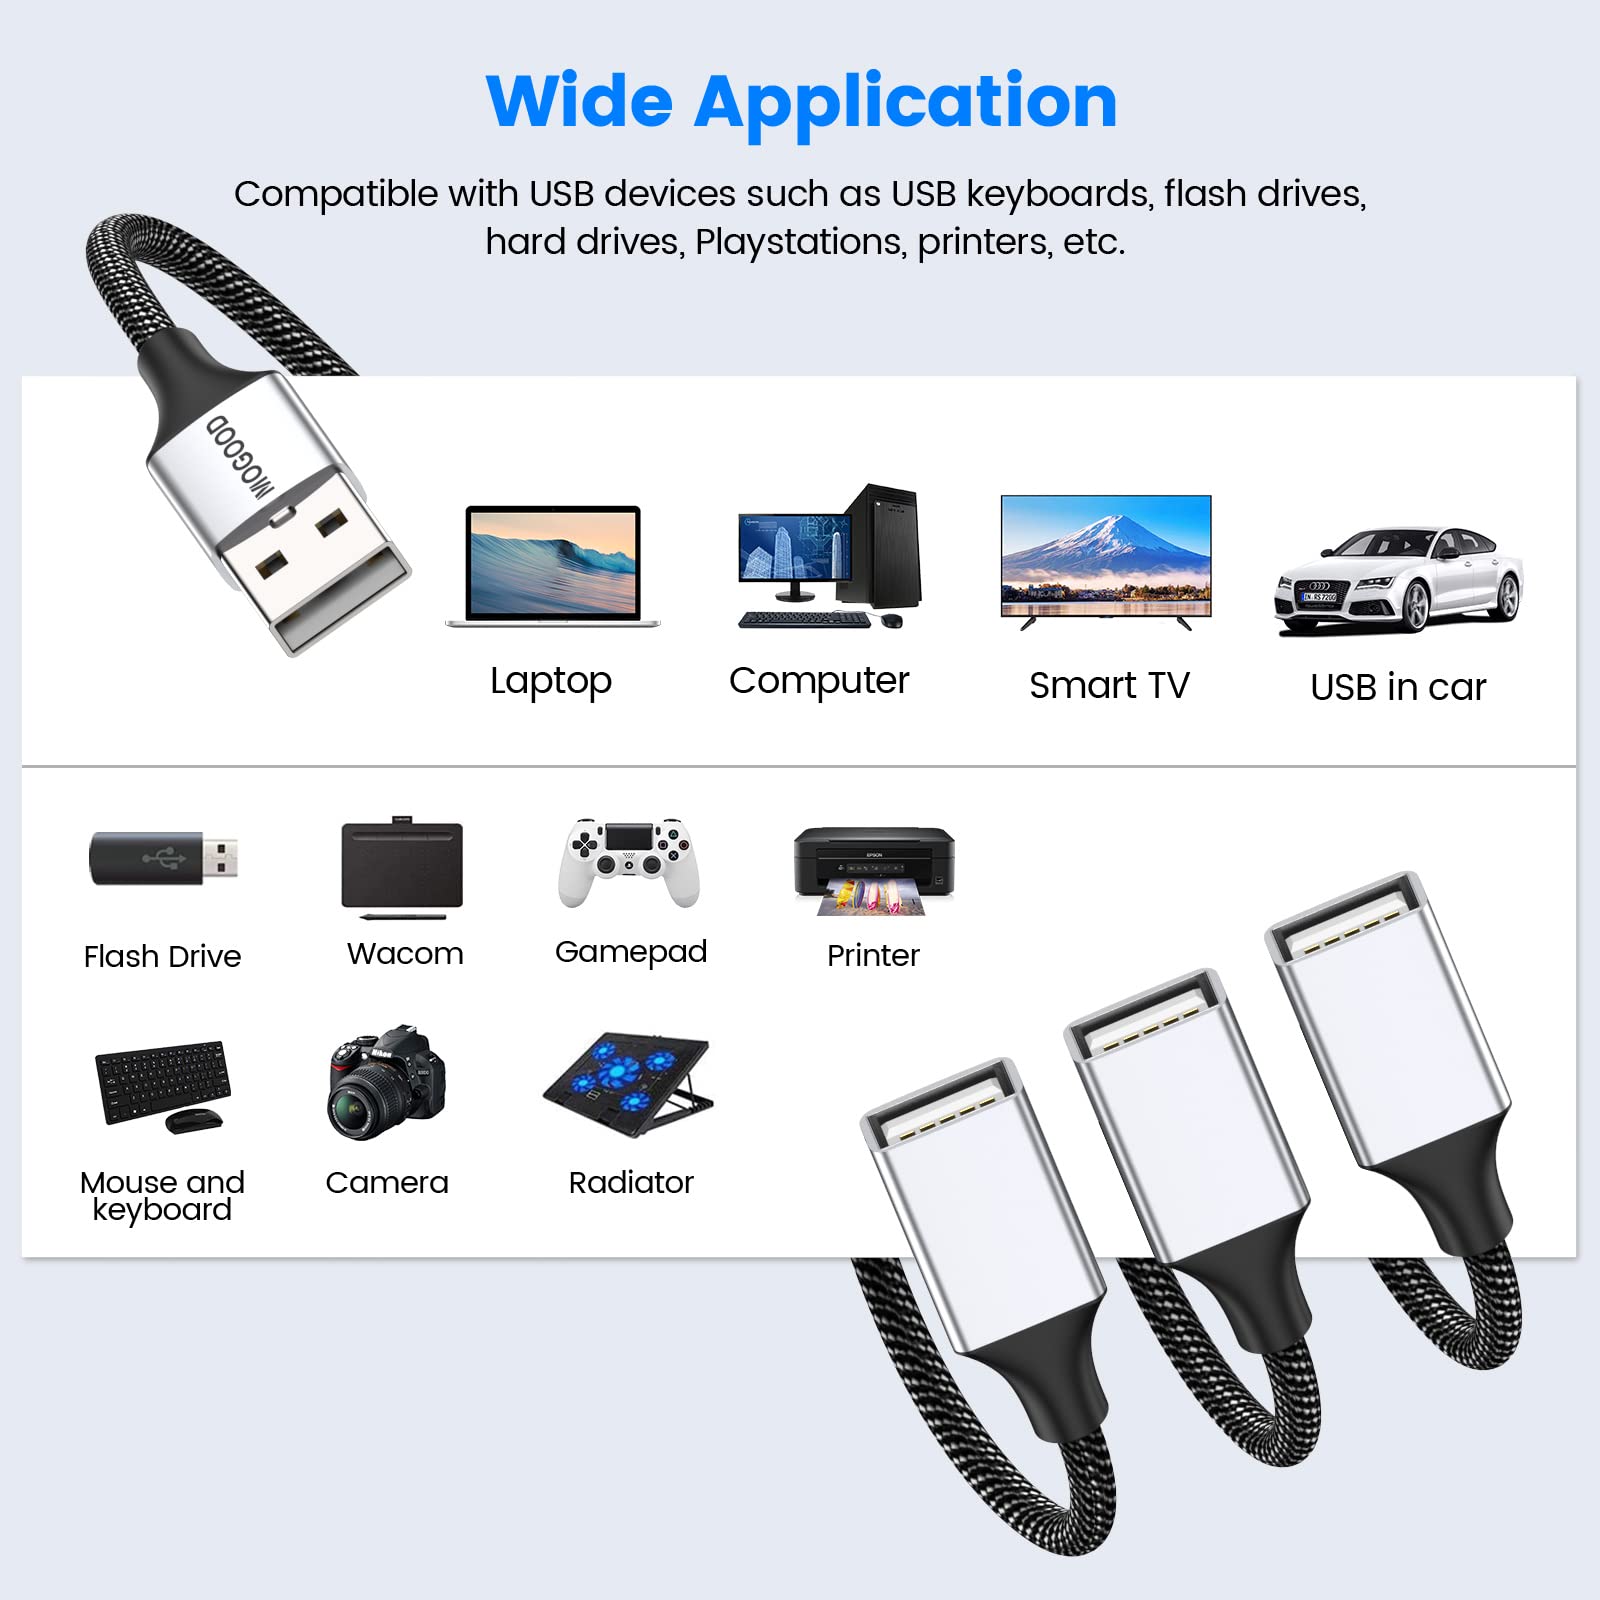 3 in 1 USB Splitter Cable, MOGOOD USB Power Splitter 1 Male to 3 Female USB 2.0 Adapter 1 to 3 USB Splitter USB Extension Cable USB multiport for Charging/Data Transfer/Laptop/Mac